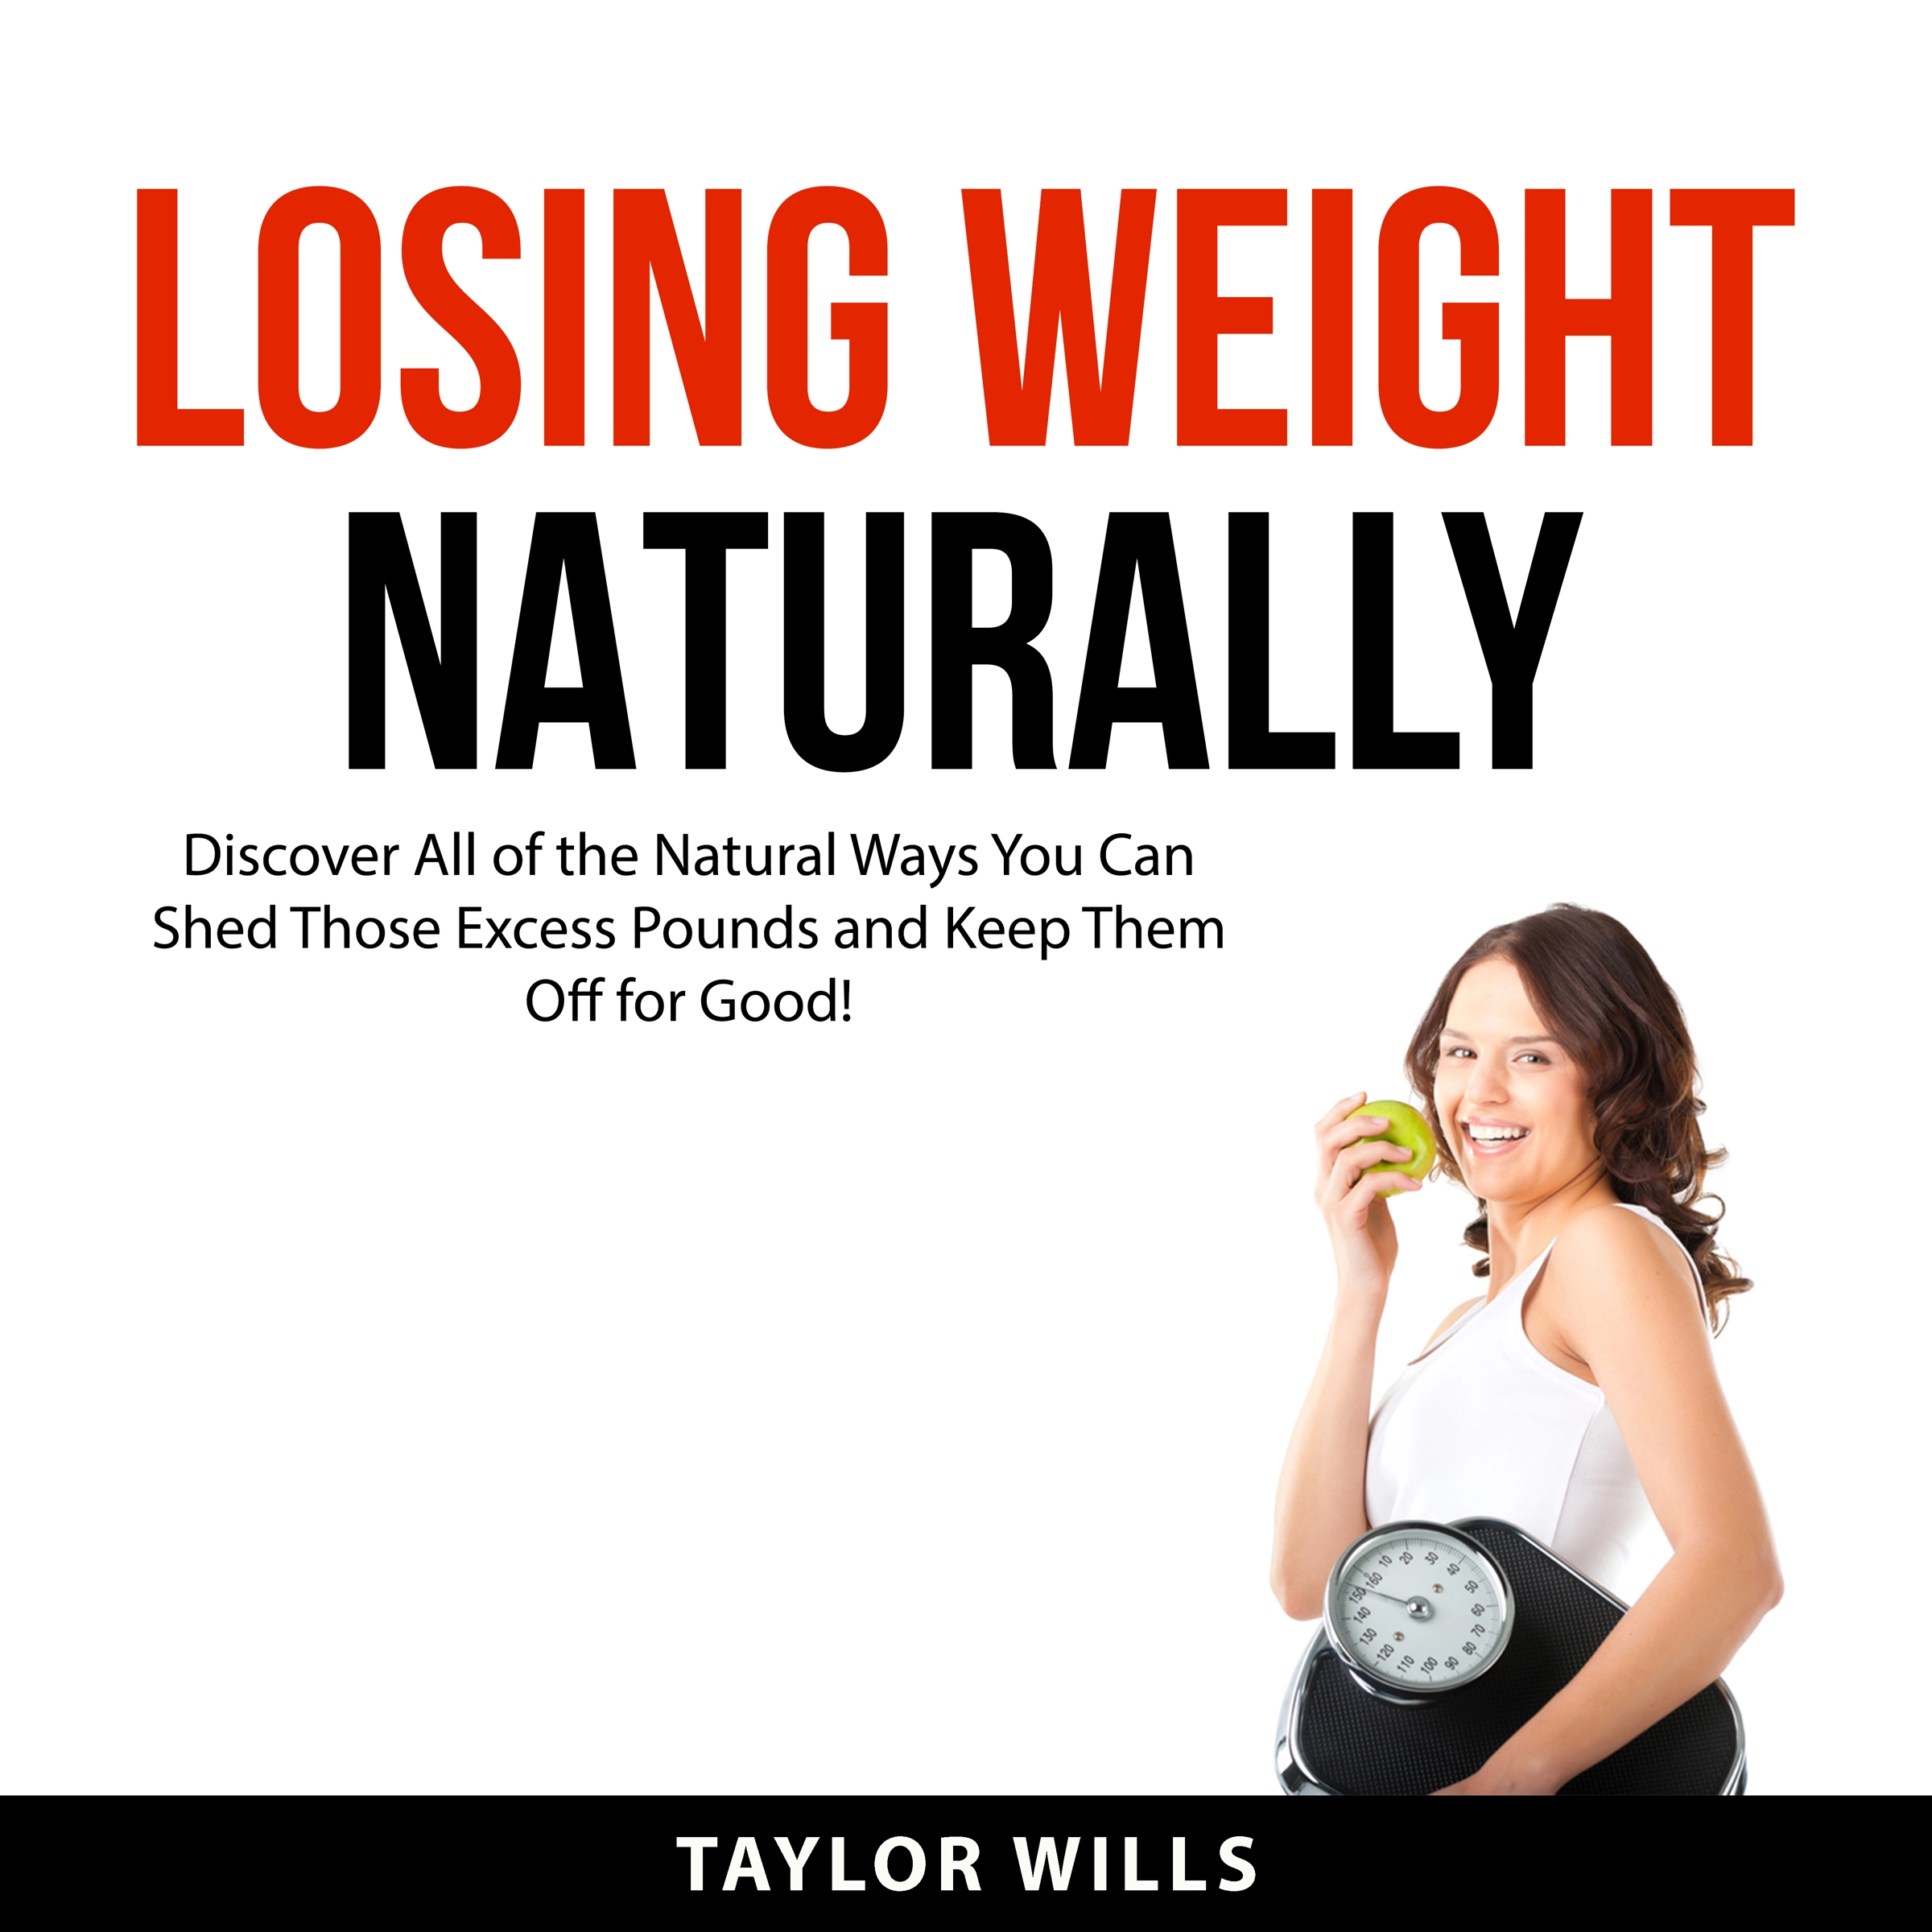 Losing Weight Naturally Audiobook by Taylor Wills